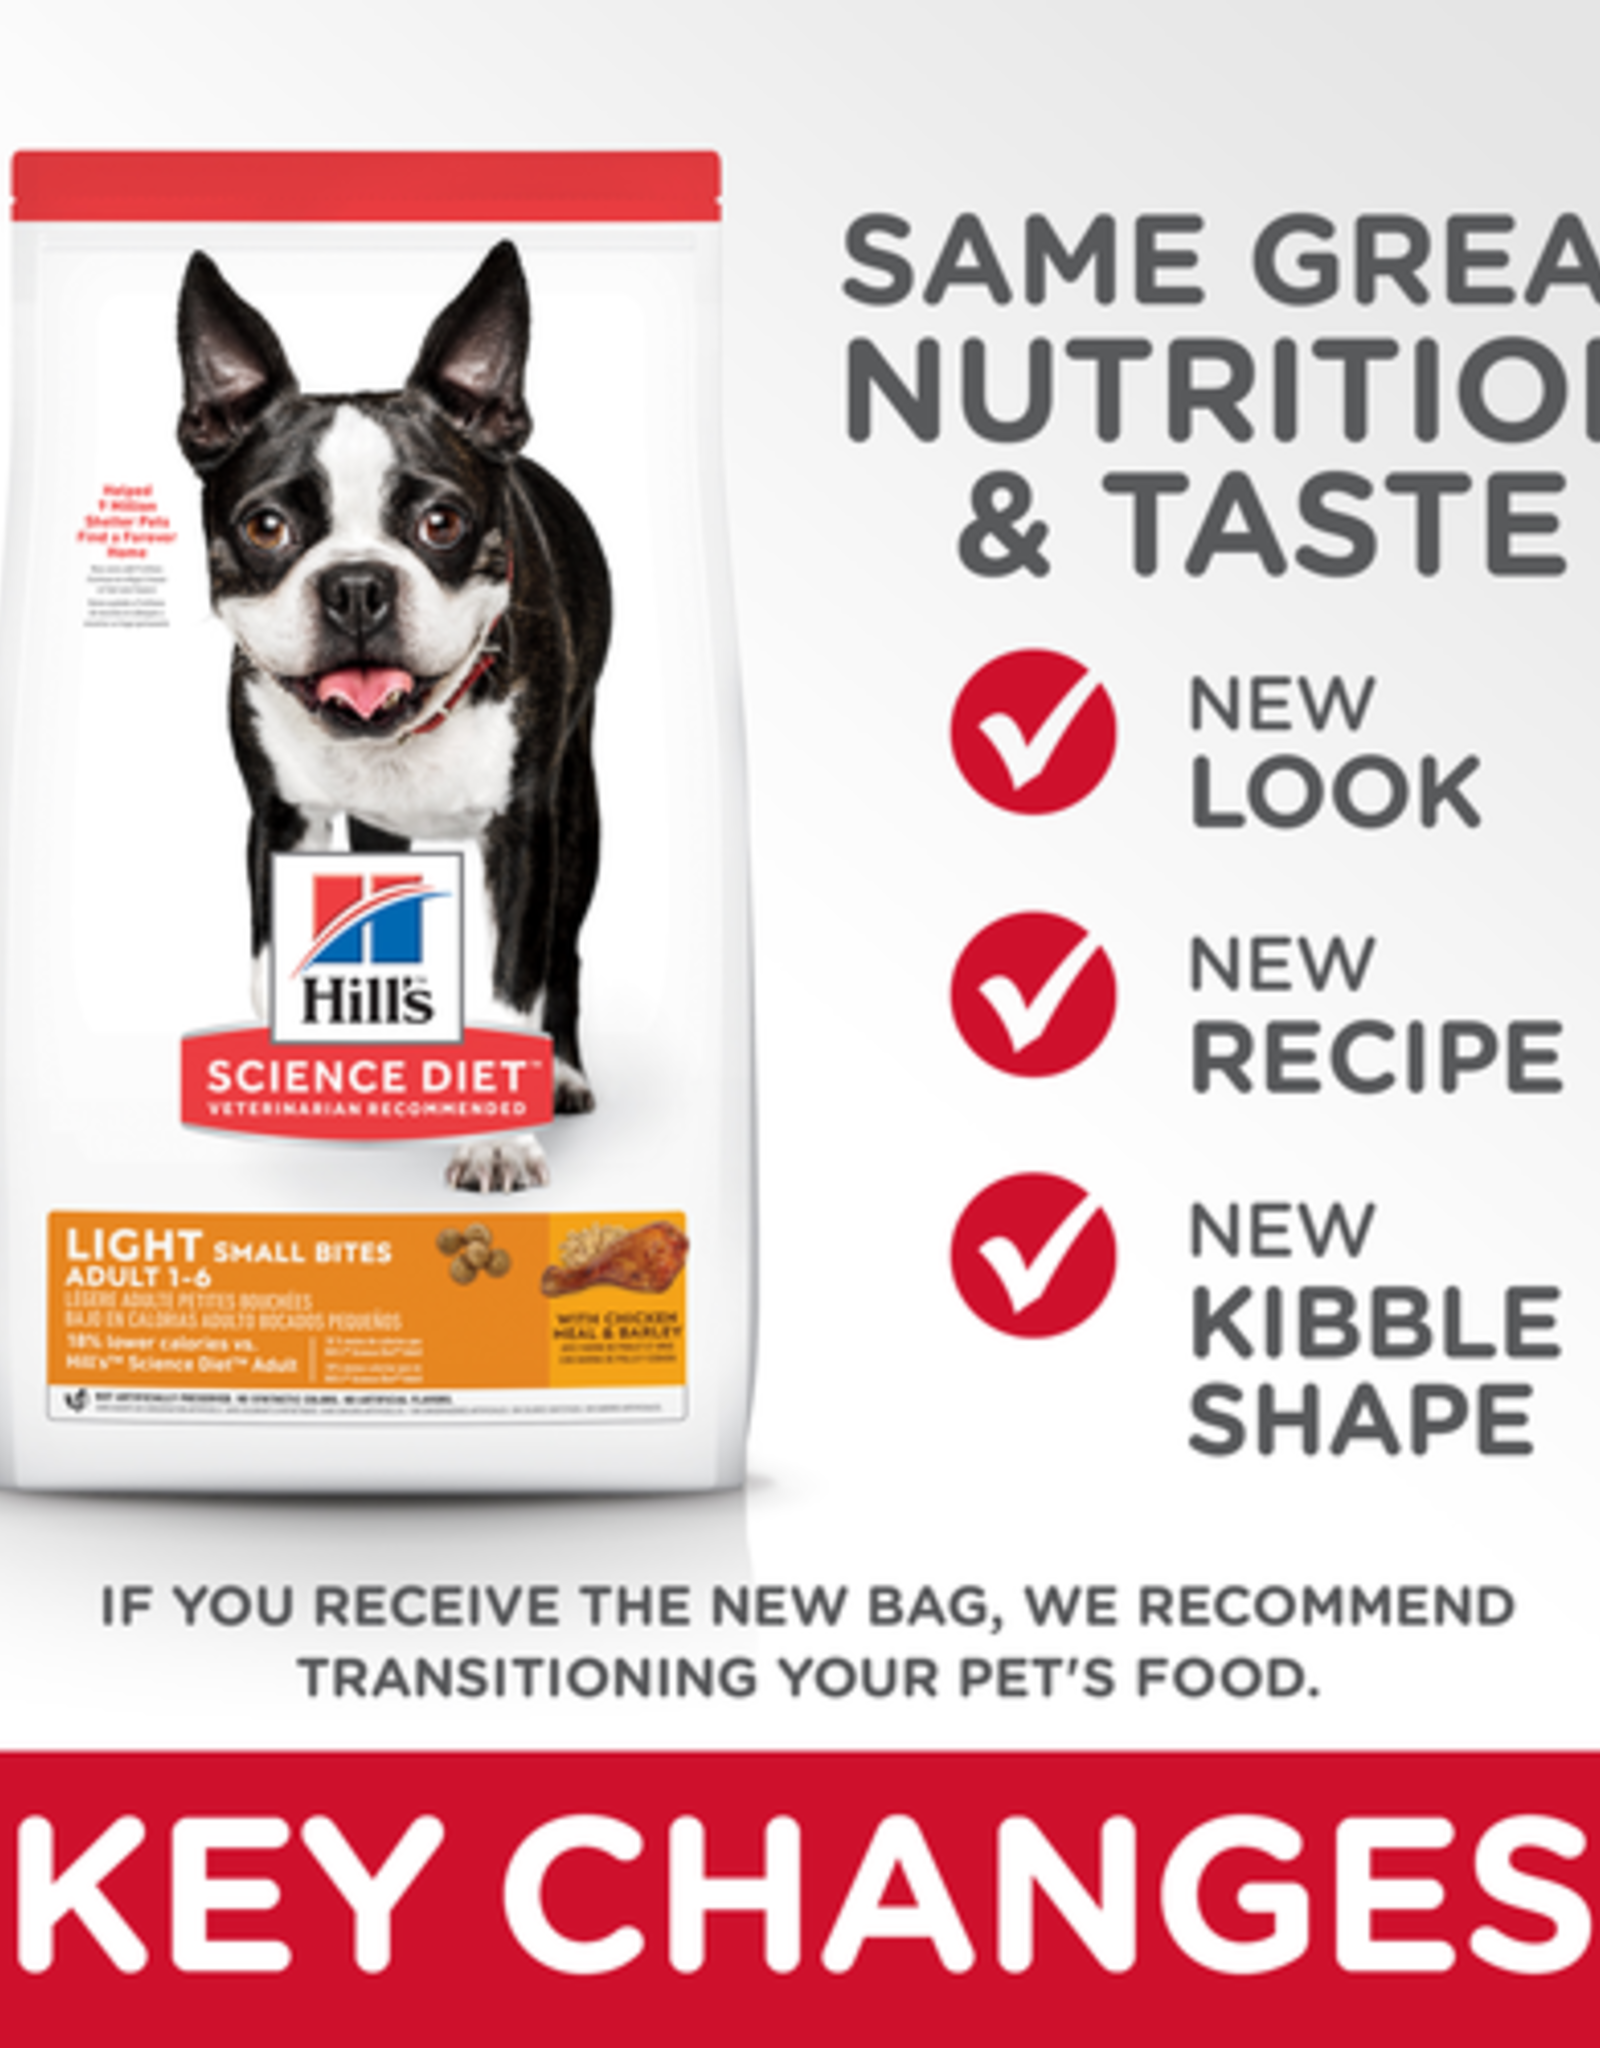 SCIENCE DIET HILL'S SCIENCE DIET CANINE LIGHT SMALL BITES 15LBS